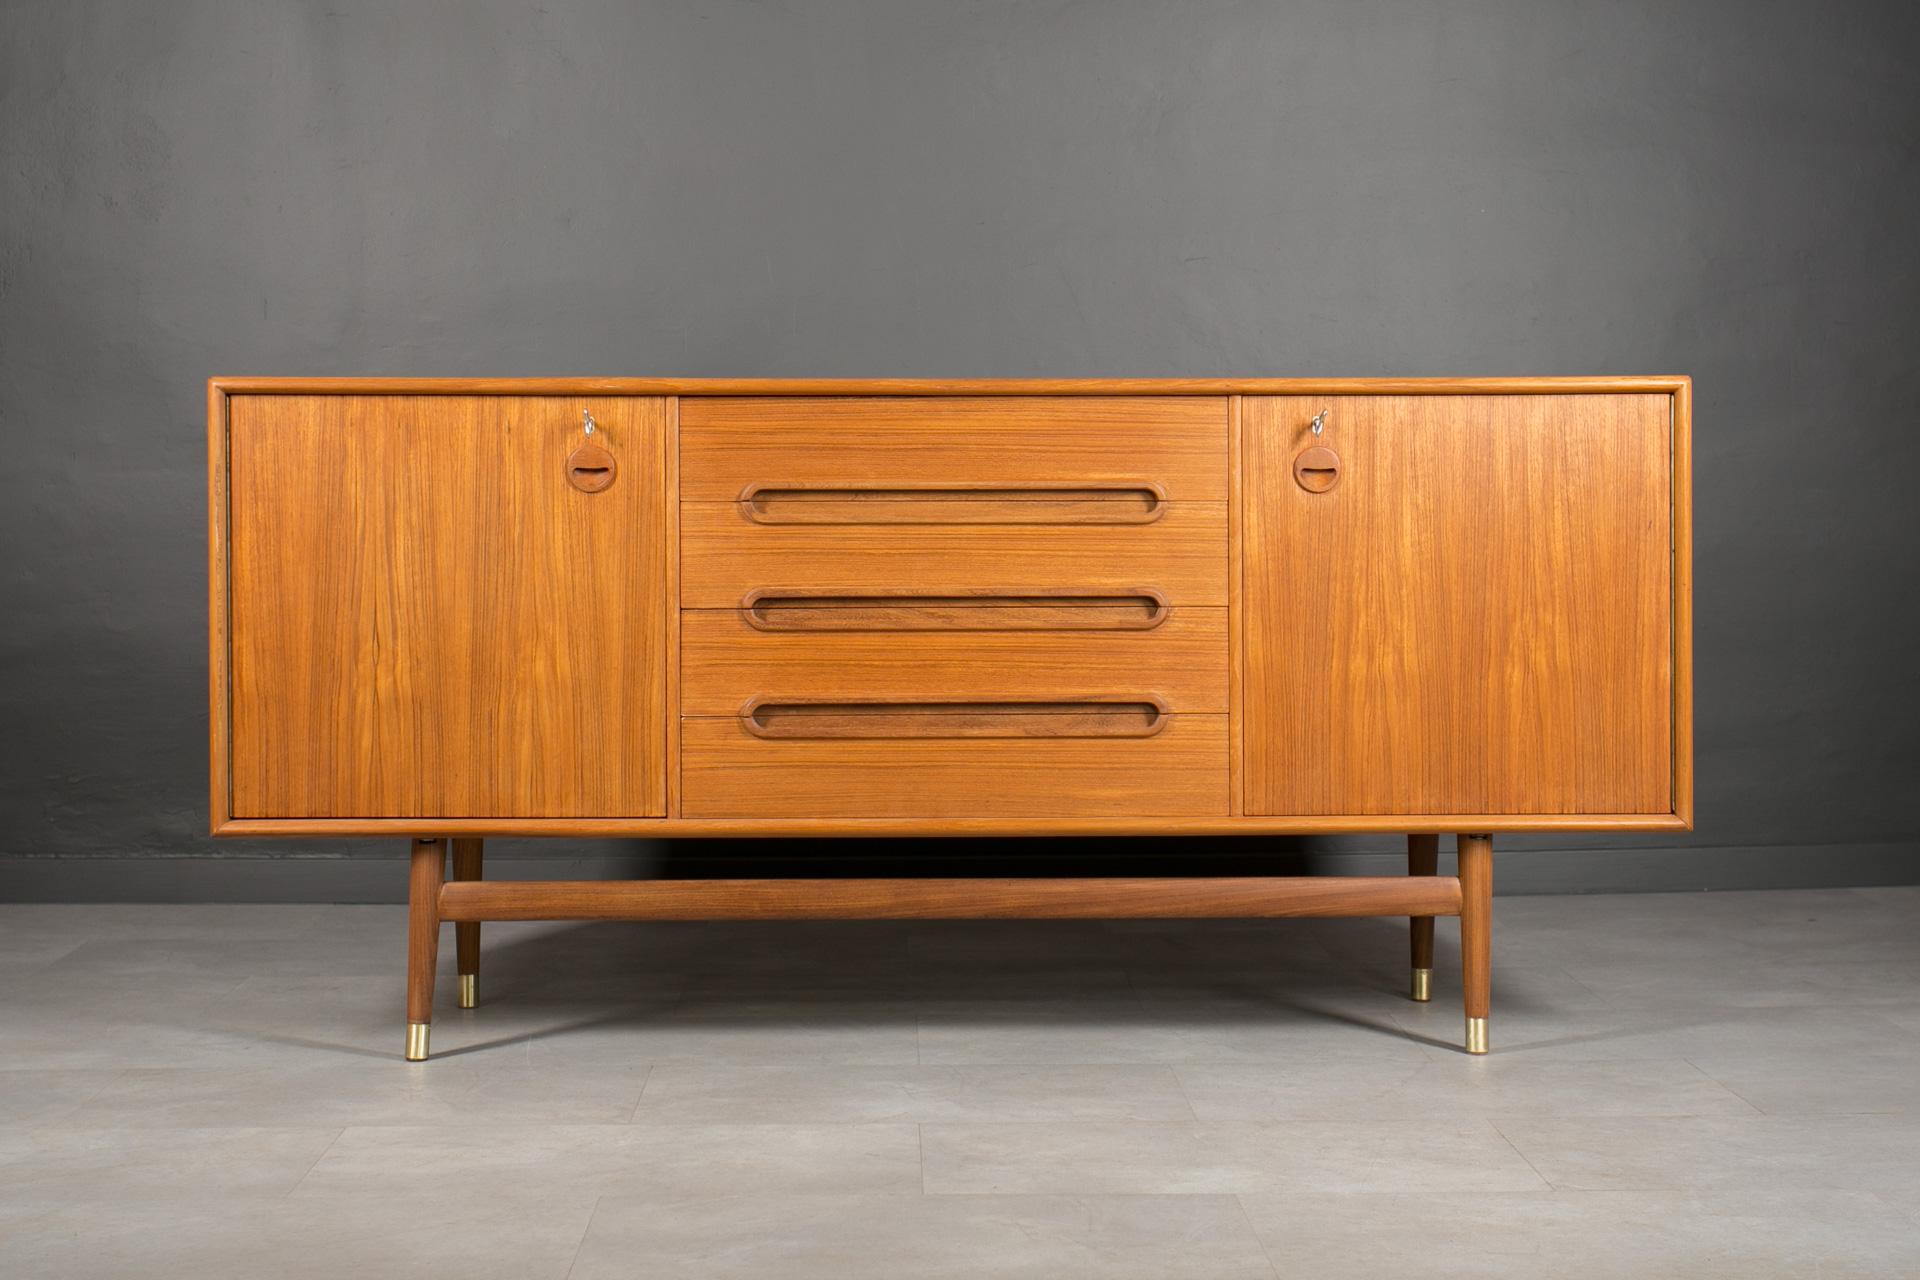 Introducing the sideboard designed by Sven Andersen – an exquisite masterpiece that seamlessly blends the timeless elegance of Scandinavian Modern design with the iconic flair of Mid-Century Modern aesthetics, transporting you straight into the chic